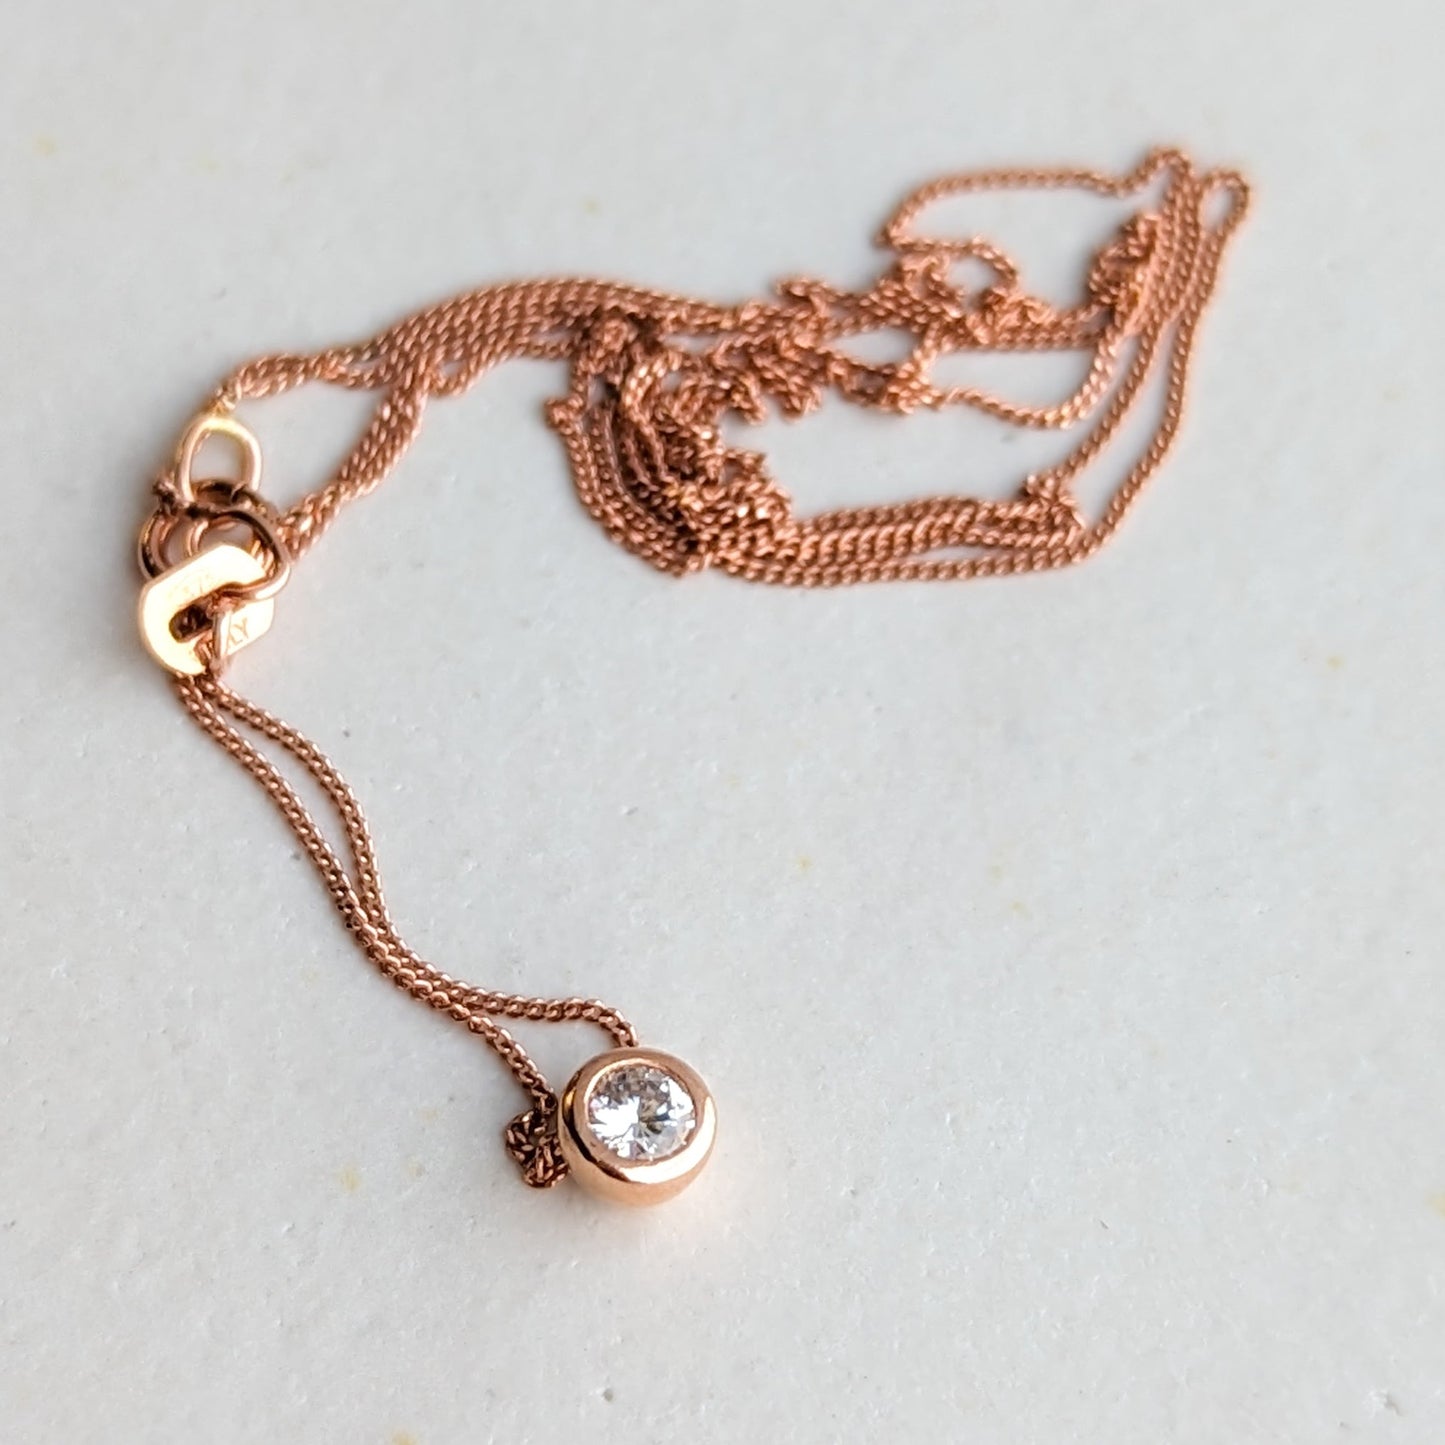 Rose gold moissanite dainty necklace from DEI collection